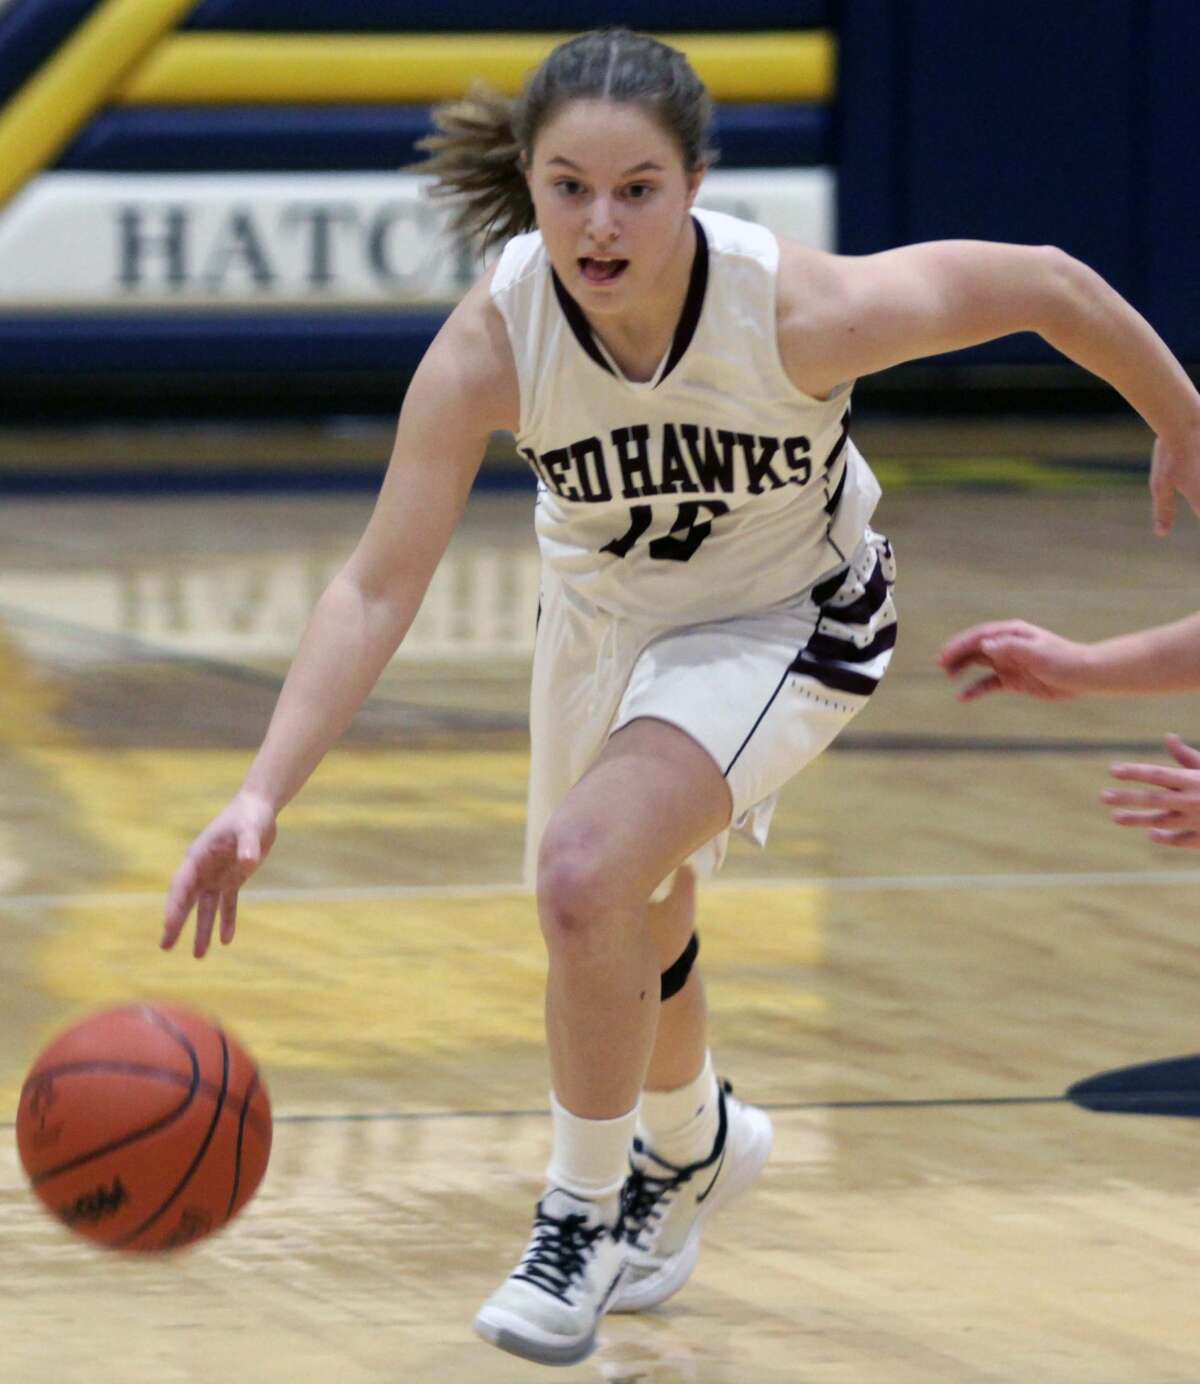 The Cass City girls basketball team pulled of a thrilling upset over Harbor Beach in the first round of districts, winning by a score of 46-34 on Monday night.